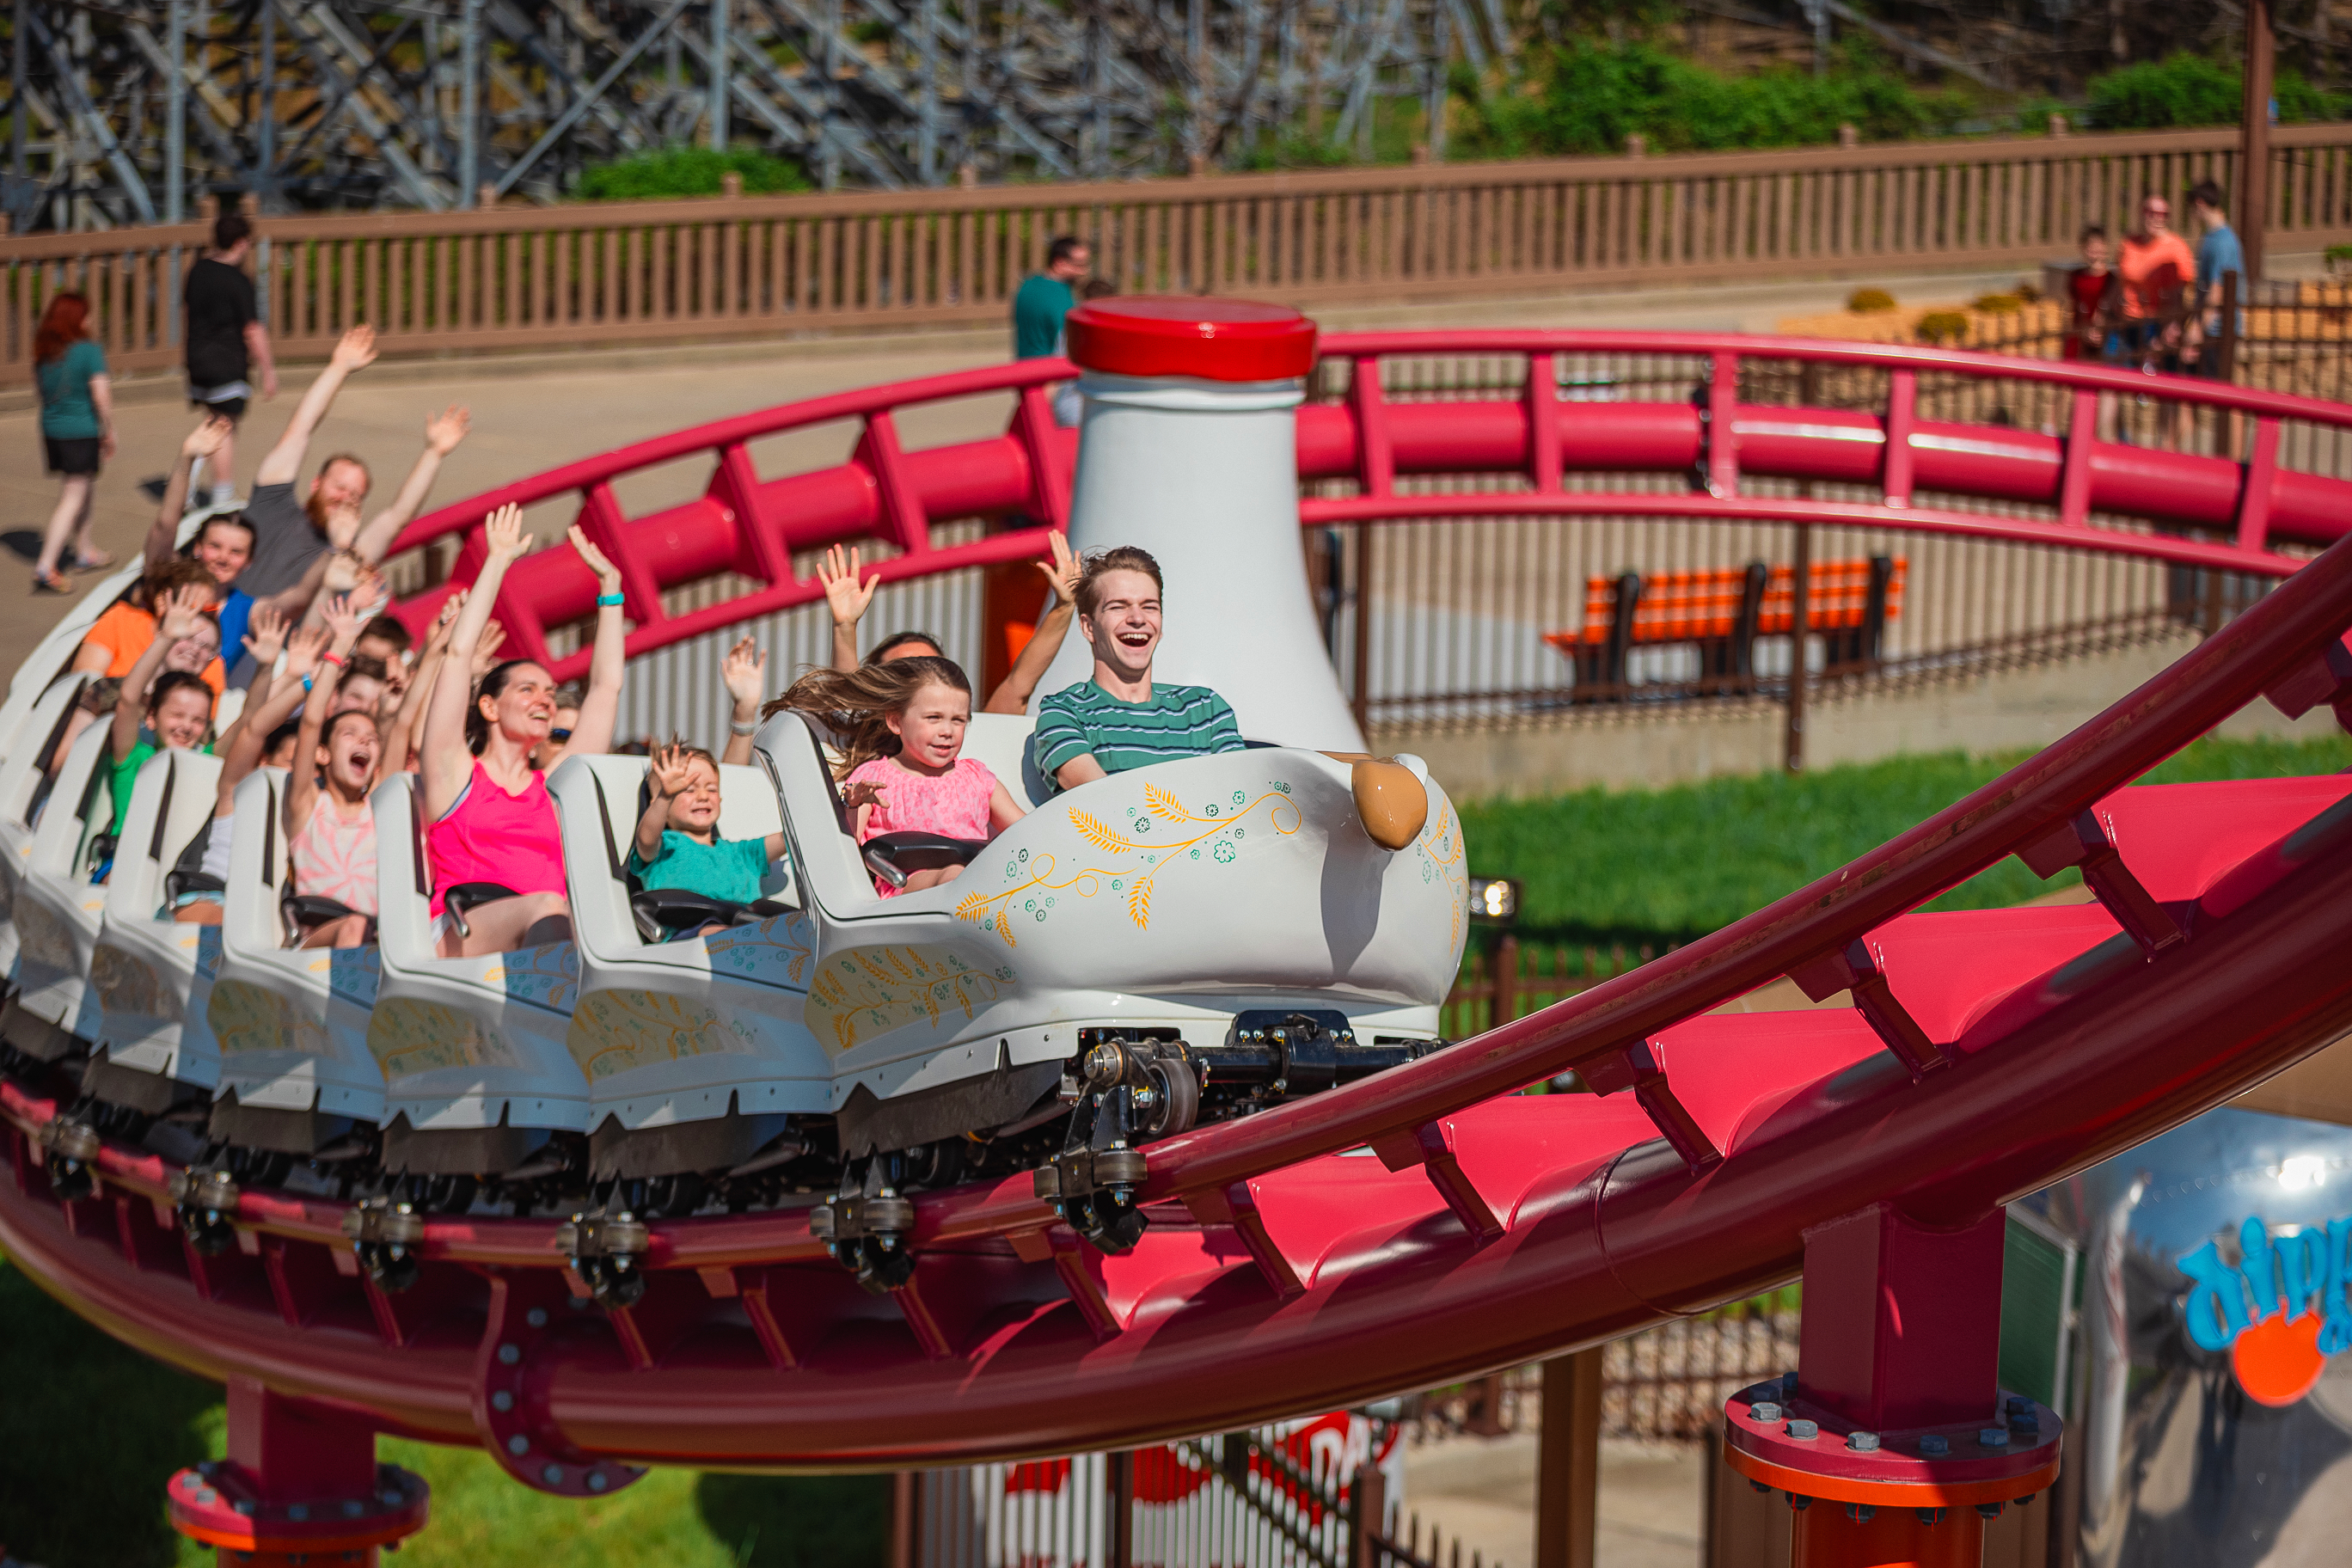 Riders approaching the final spike on Good Gravy! family coaster.